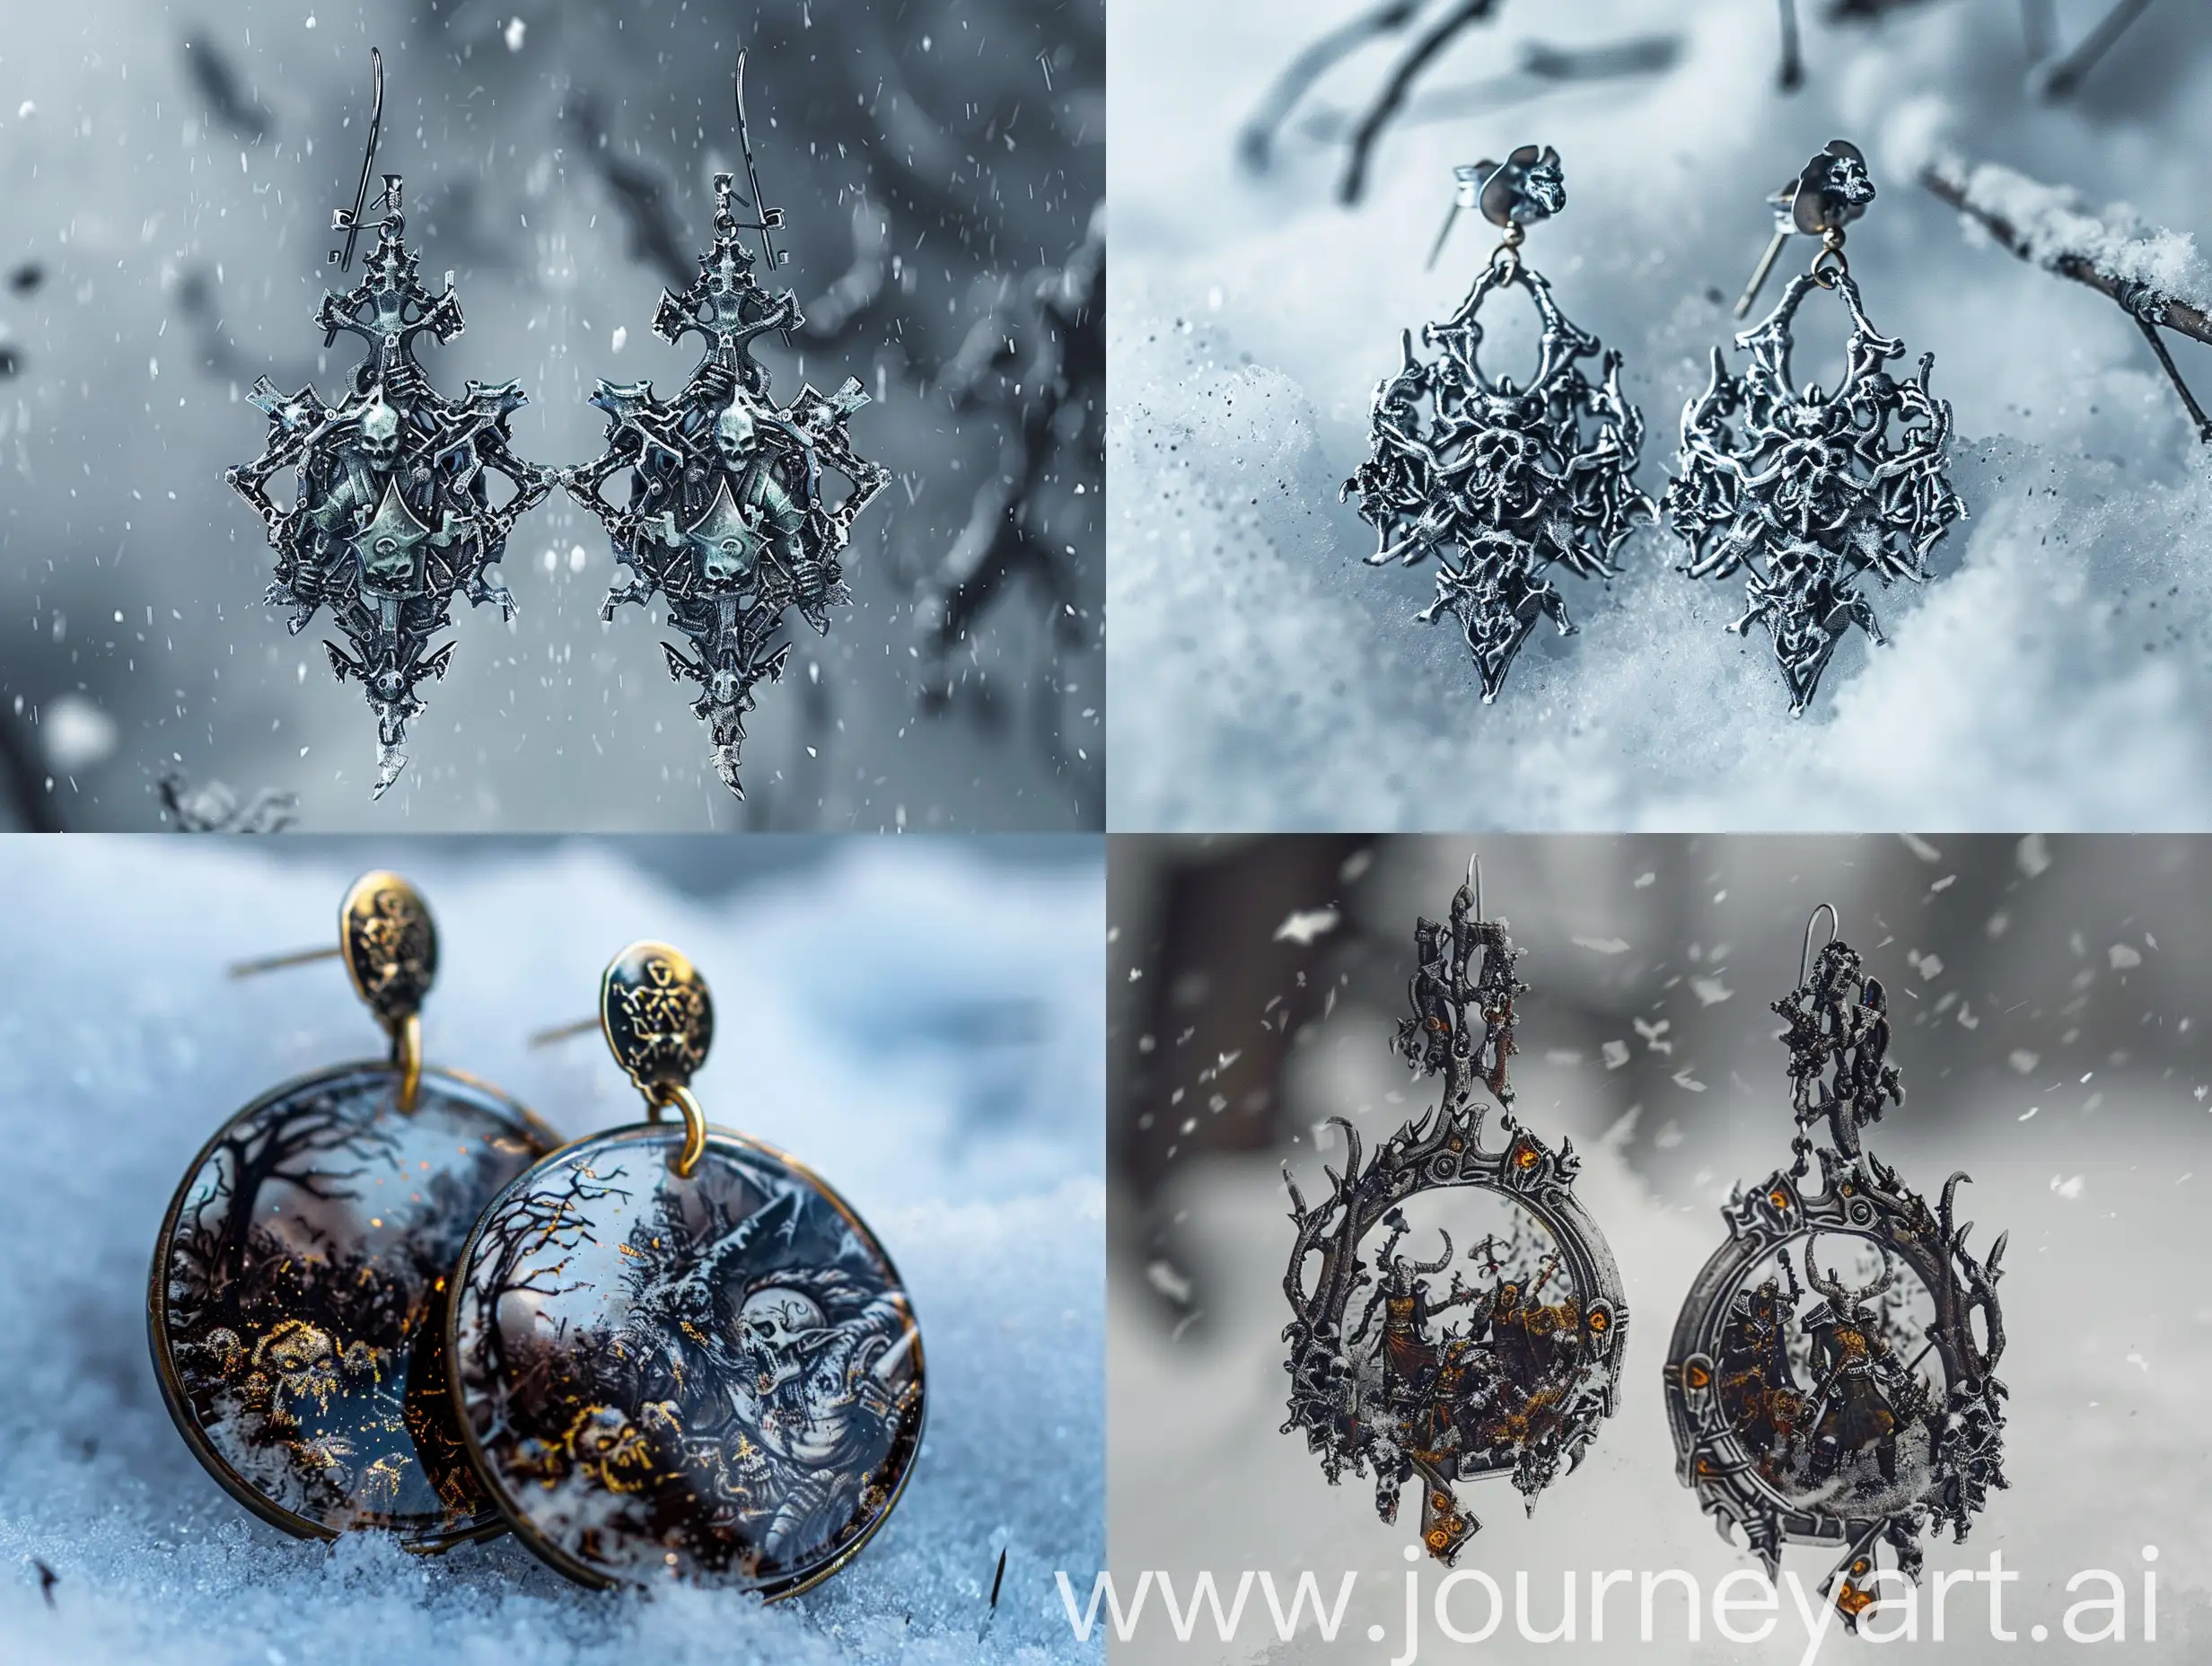 vampire divine godess elf necromancer cimmerian from warcraft jewelry earrings evil with abstract symmetrical representation of horde of zombies in tundra haze snow storm